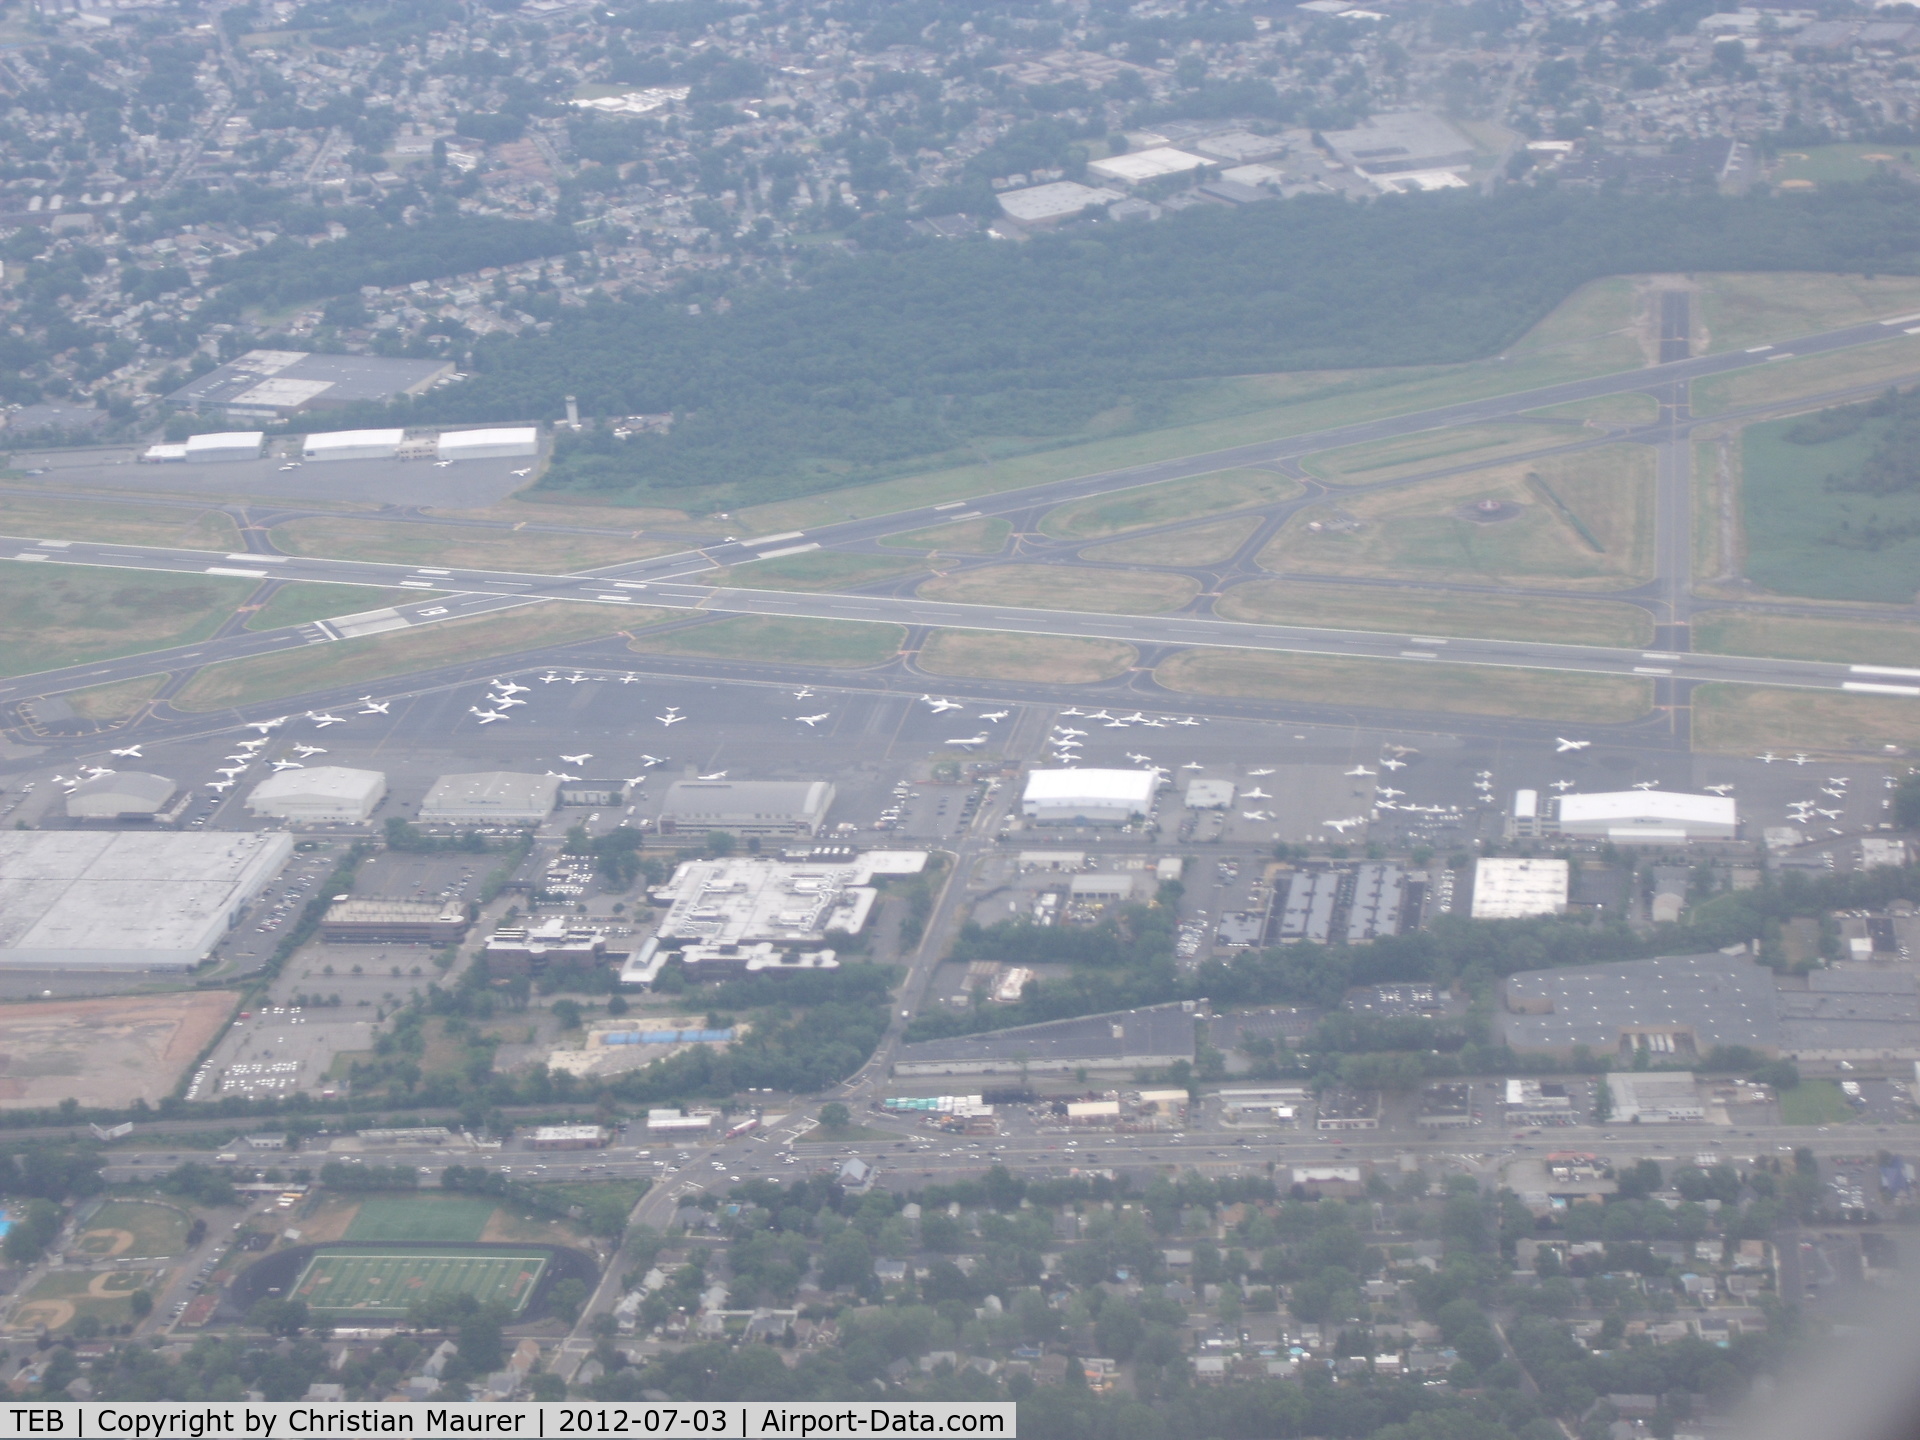 Teterboro Airport (TEB) - On final into EWR with the Boeing 757-200 Passing Teterboro NJ Rgnl Airport